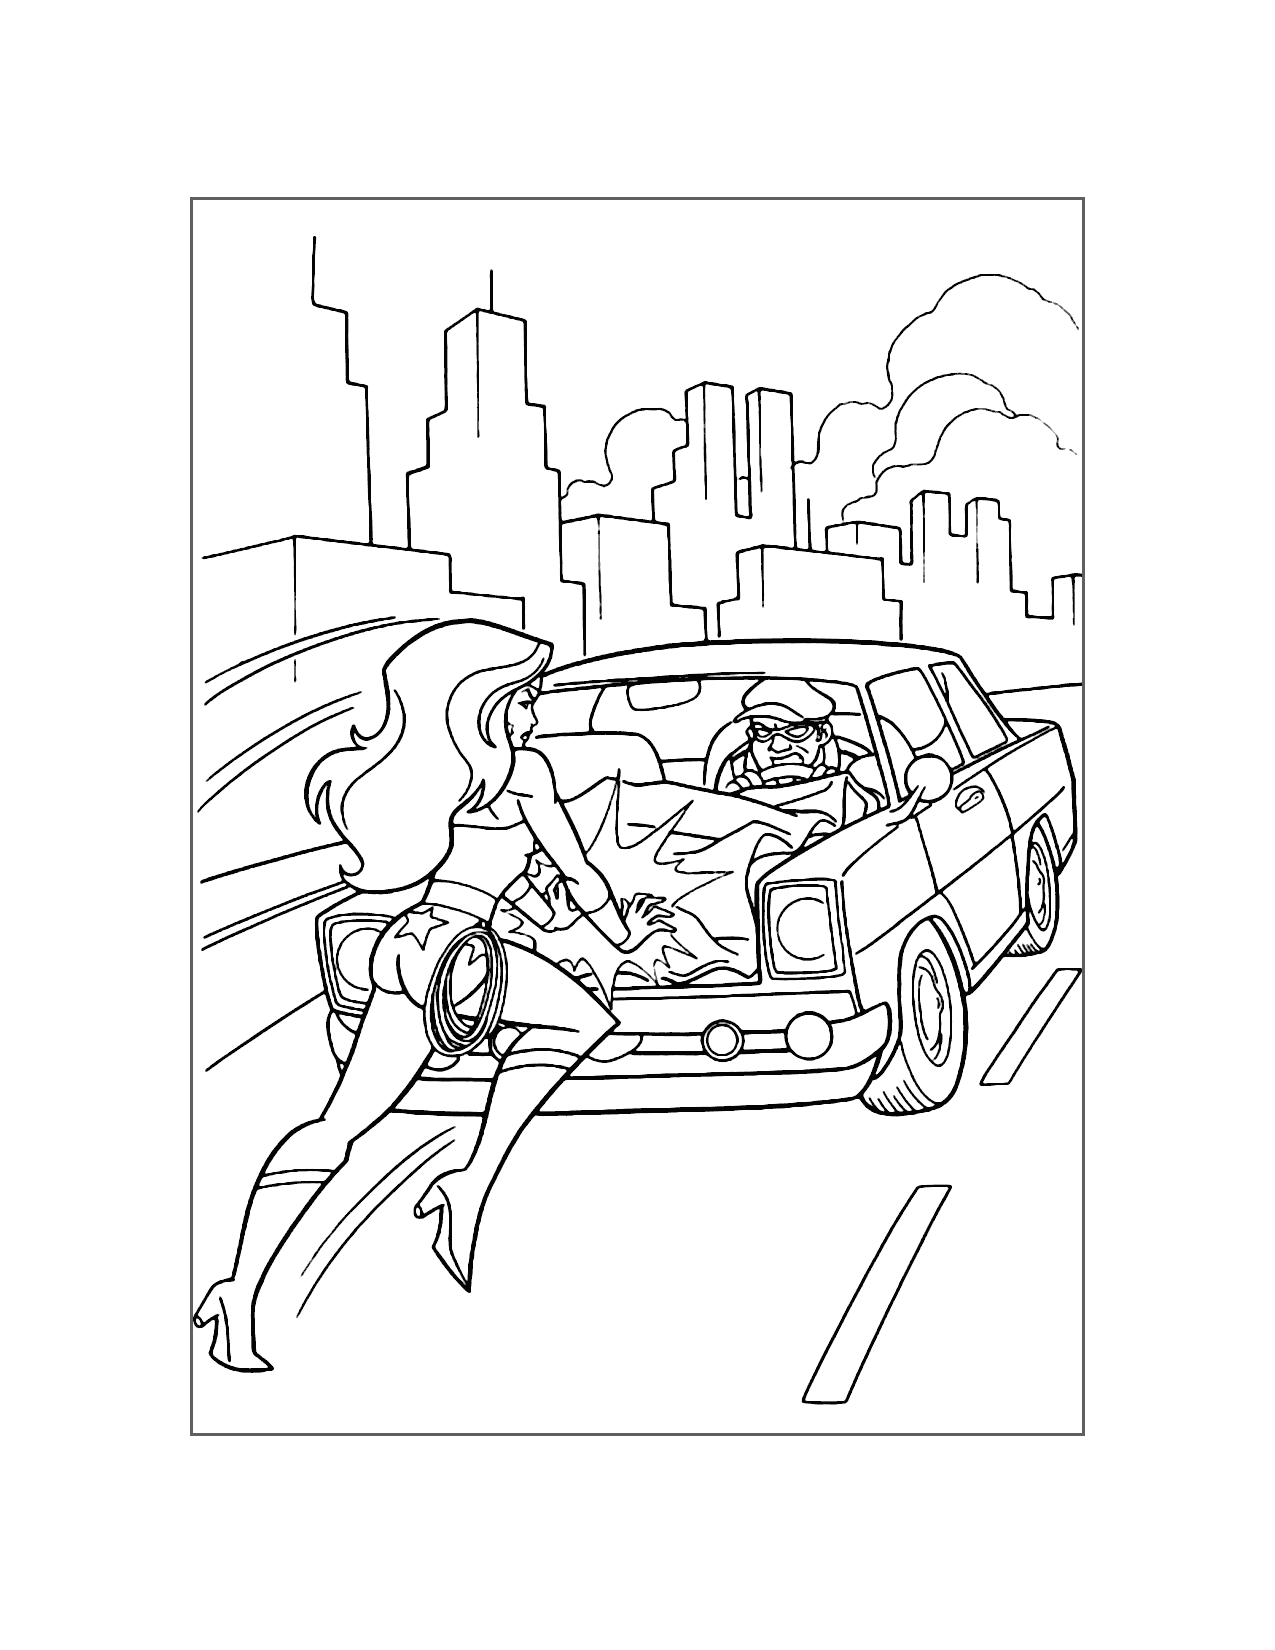 Wonder Woman Stops A Car Coloring Page